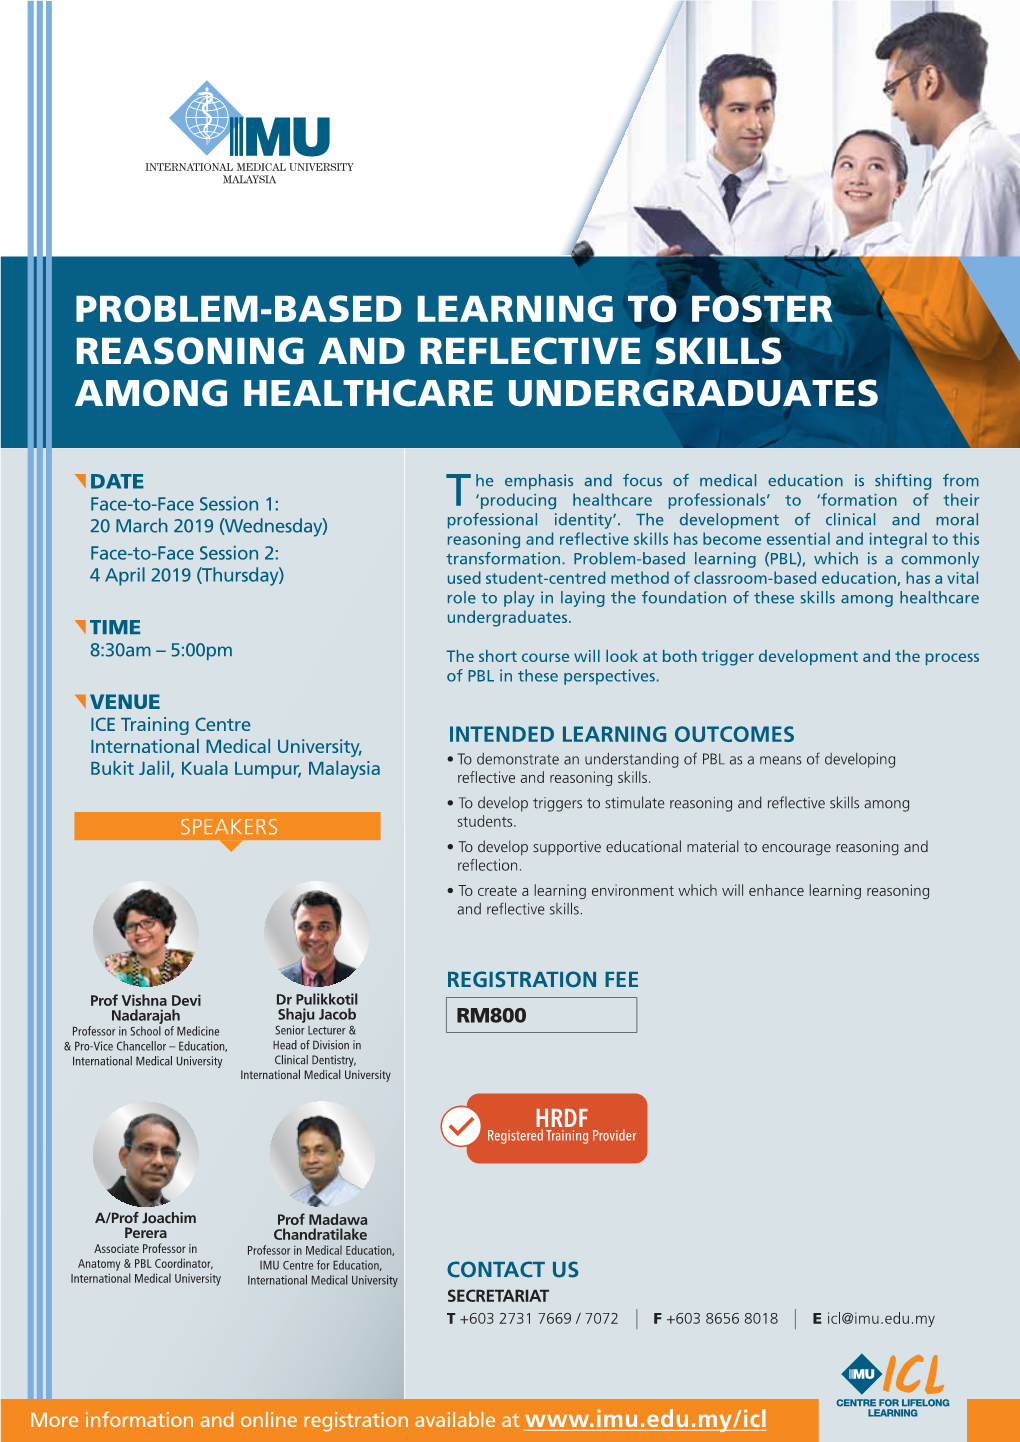 Problem-Based Learning to Foster Reasoning and Reflective Skills Among Healthcare Undergraduates